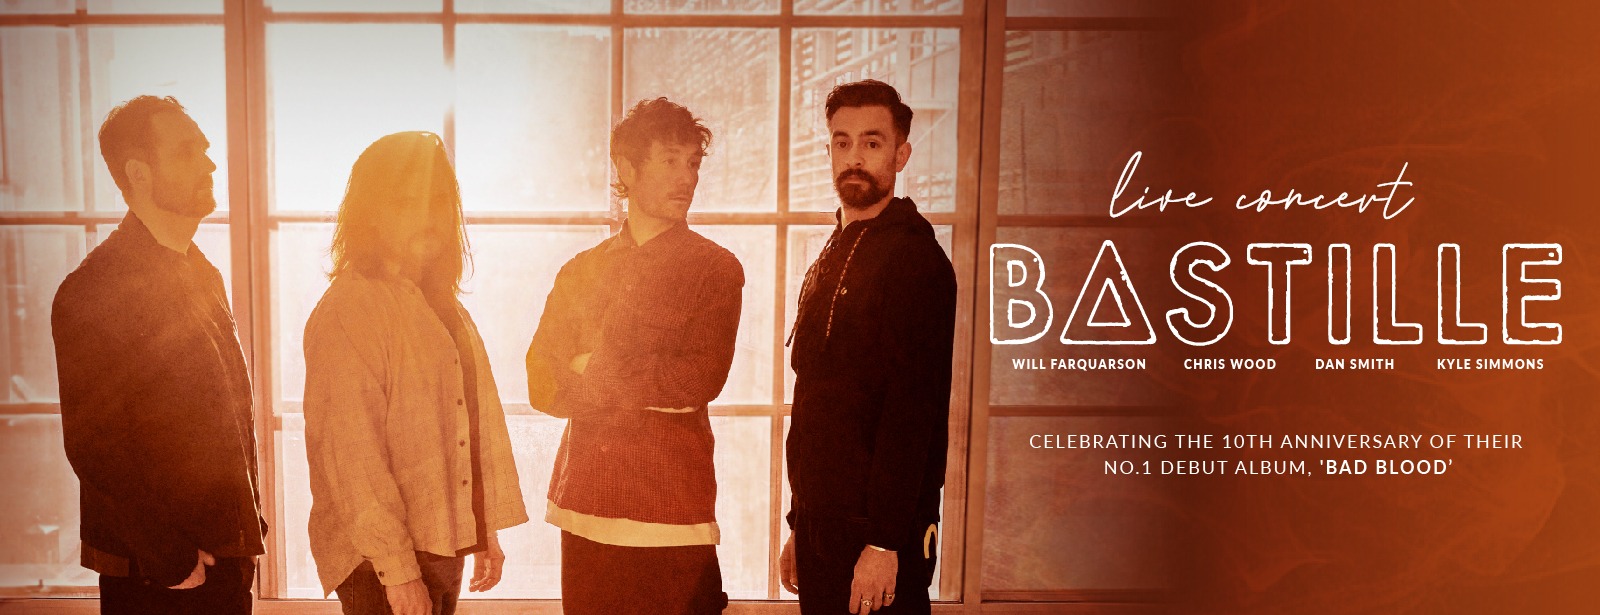 Bastille Live in Dubai at Coca-Cola Arena: An Unforgettable Indie-Pop Experience! - Coming Soon in UAE